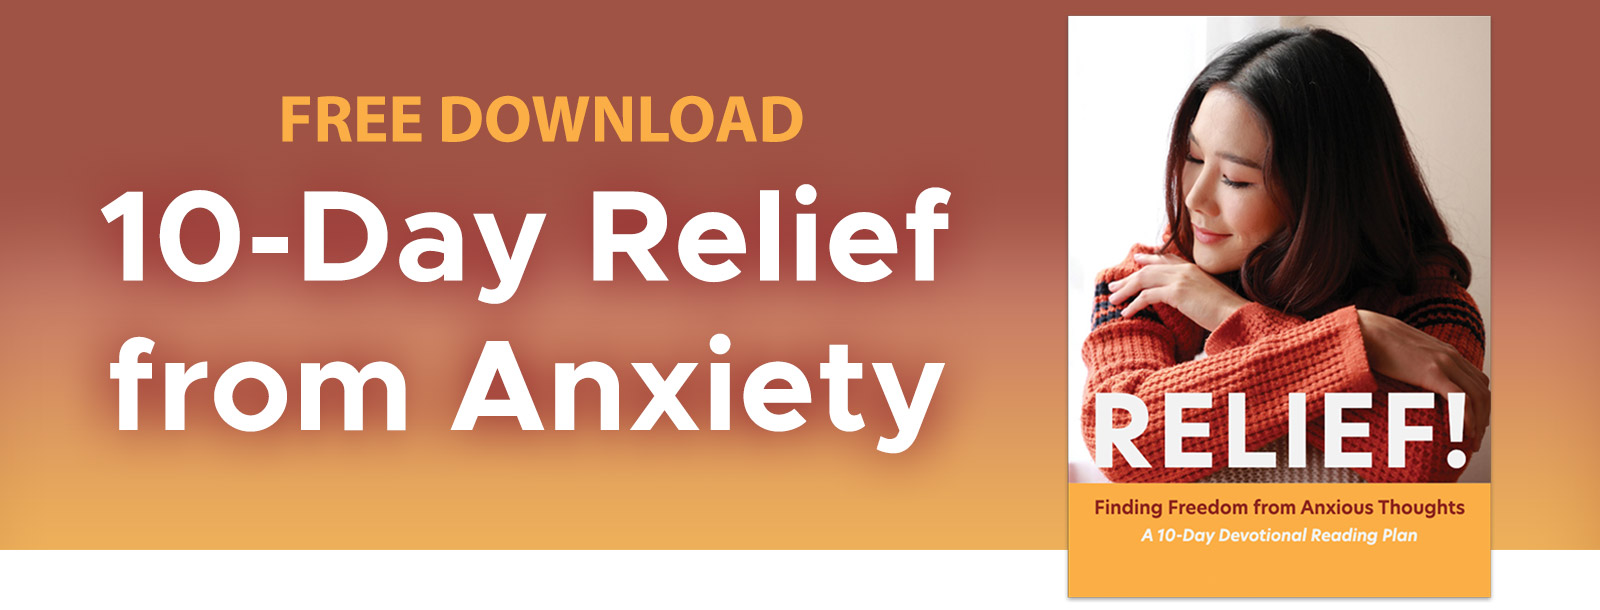 10-Day Relief from Anxiety